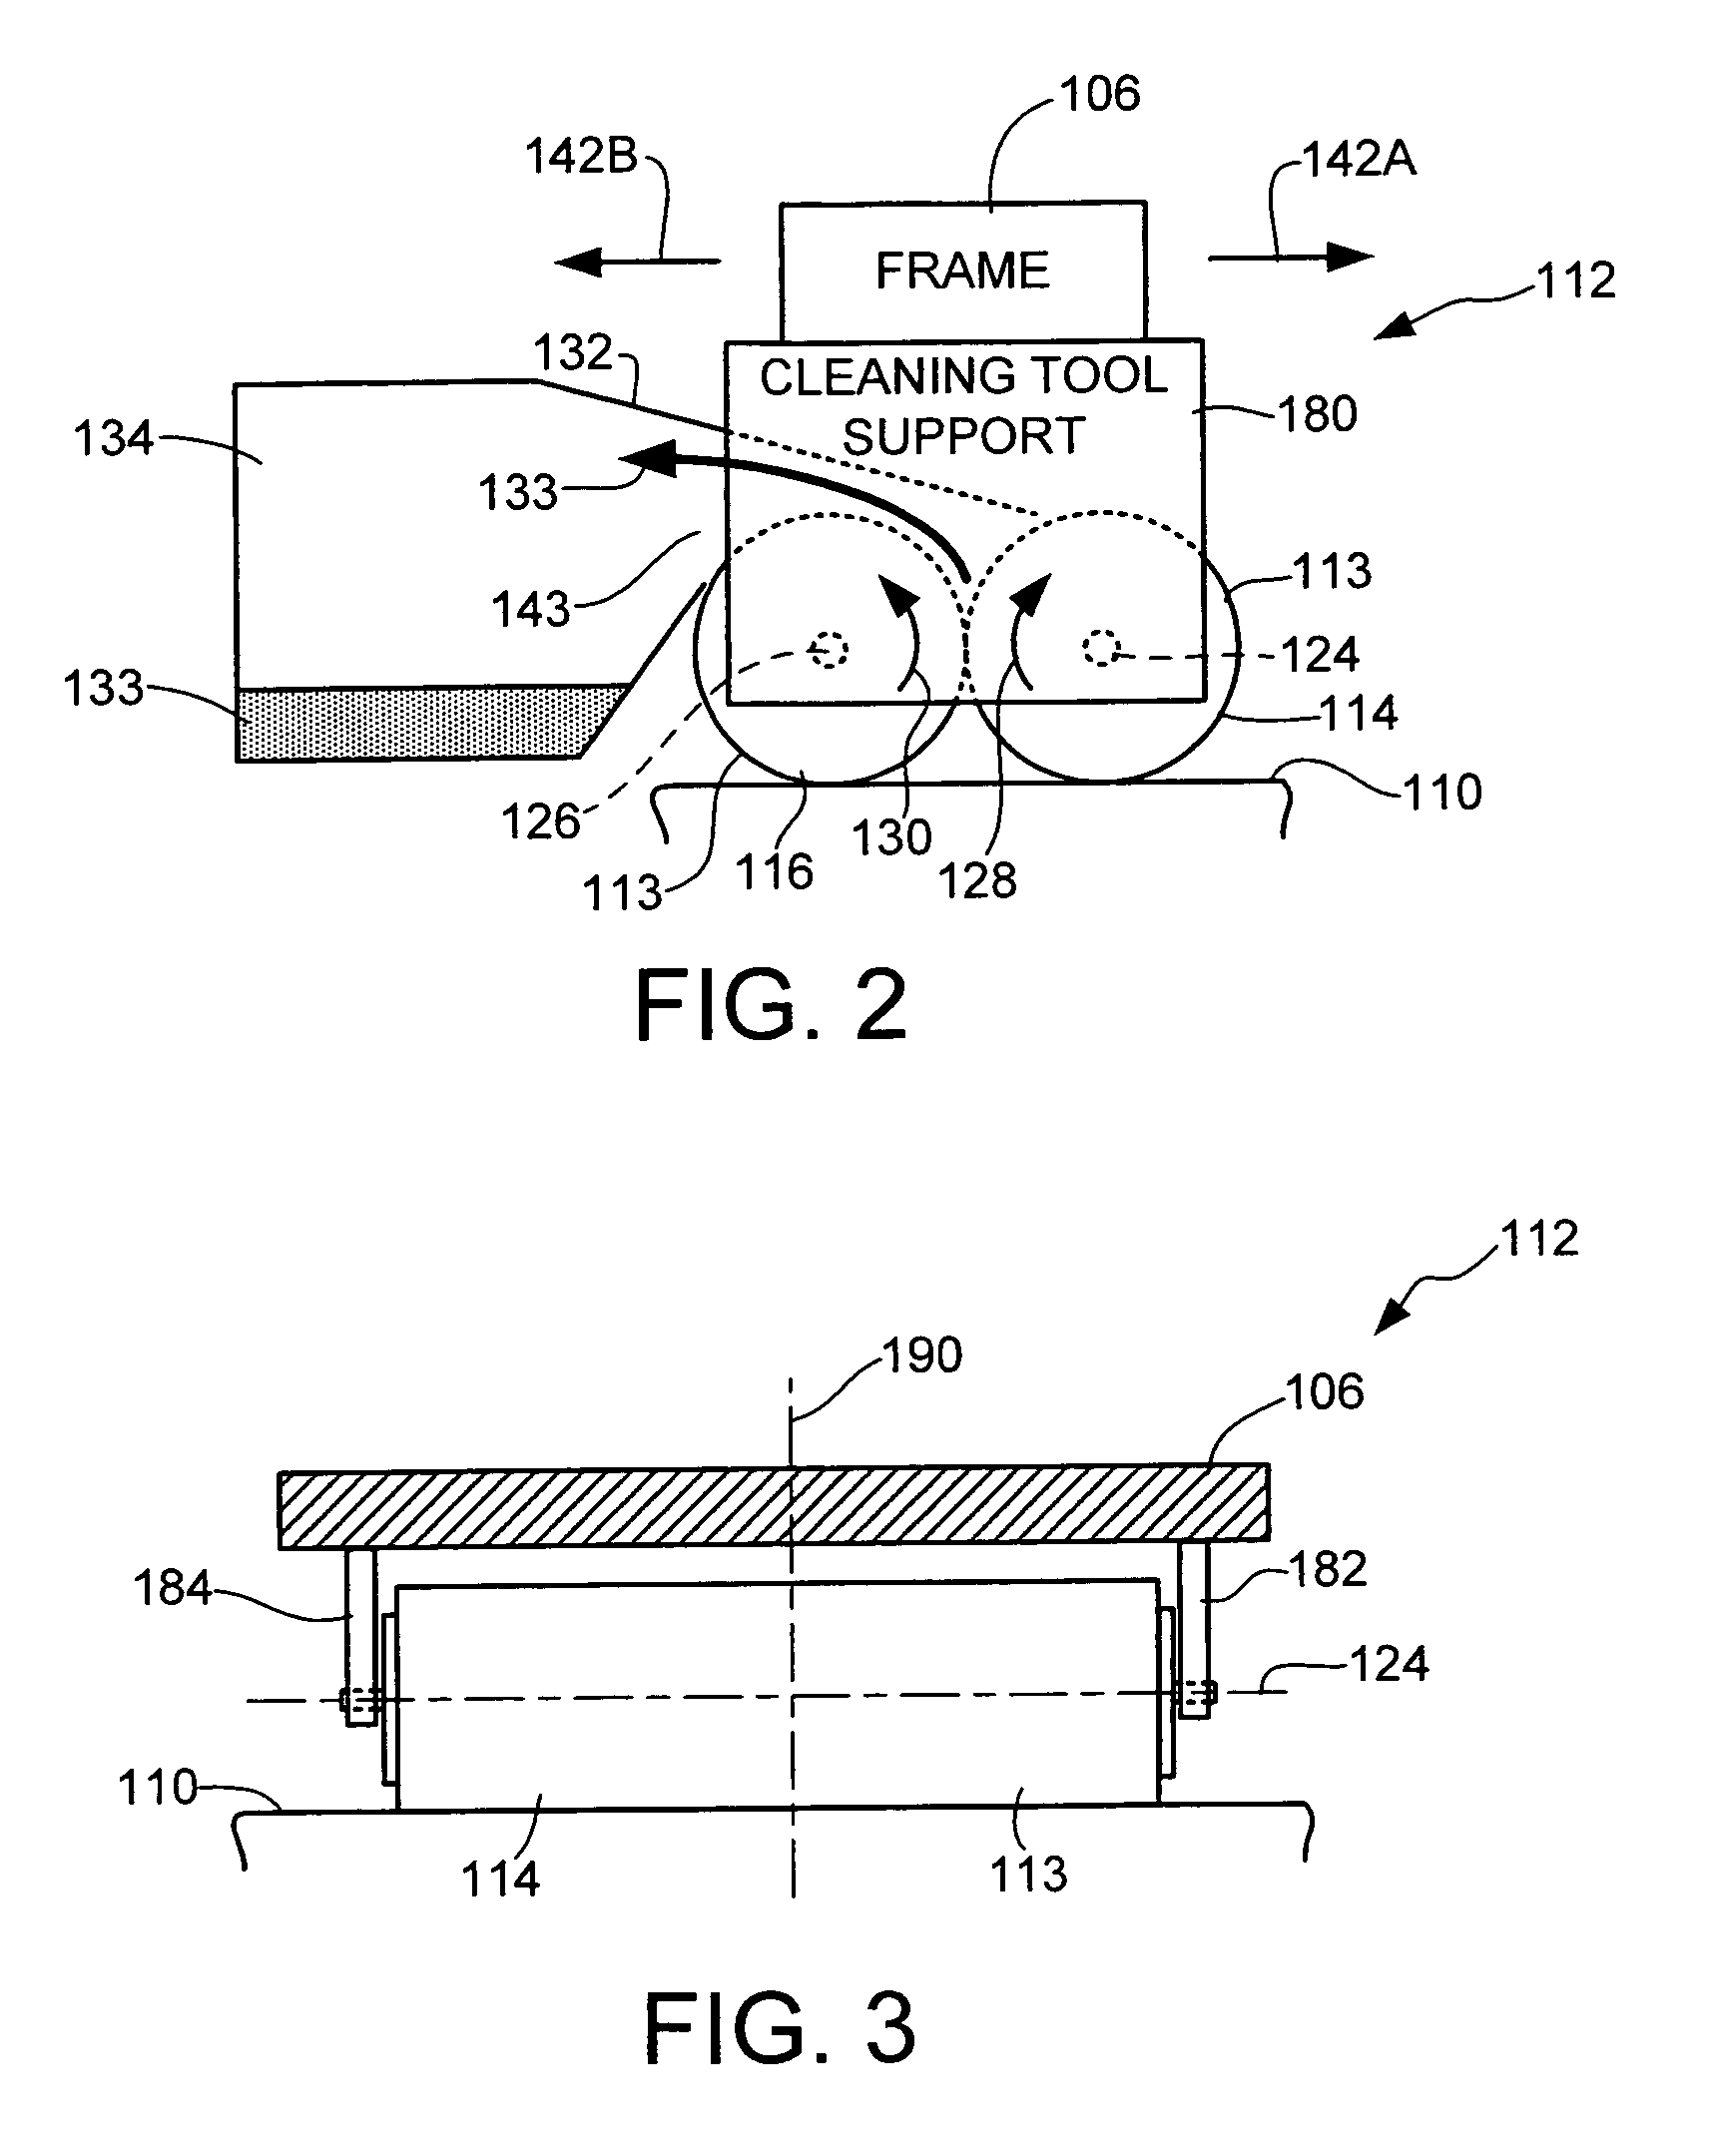 Cleaning head for use in a floor cleaning machine